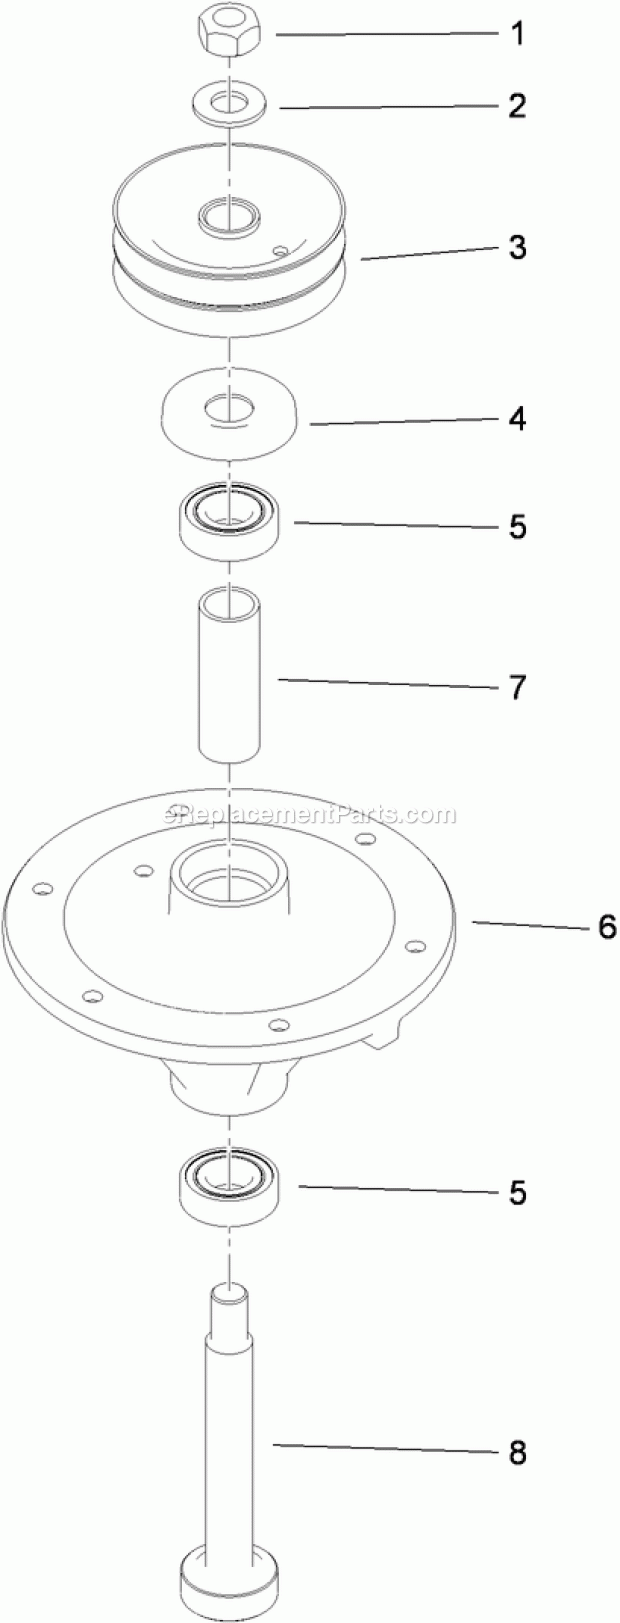 Toro 74536 (311000001-311999999) Grandstand Mower, With 40in Turbo Force Cutting Unit, 2011 Spindle Assembly No. 117-7636 Diagram